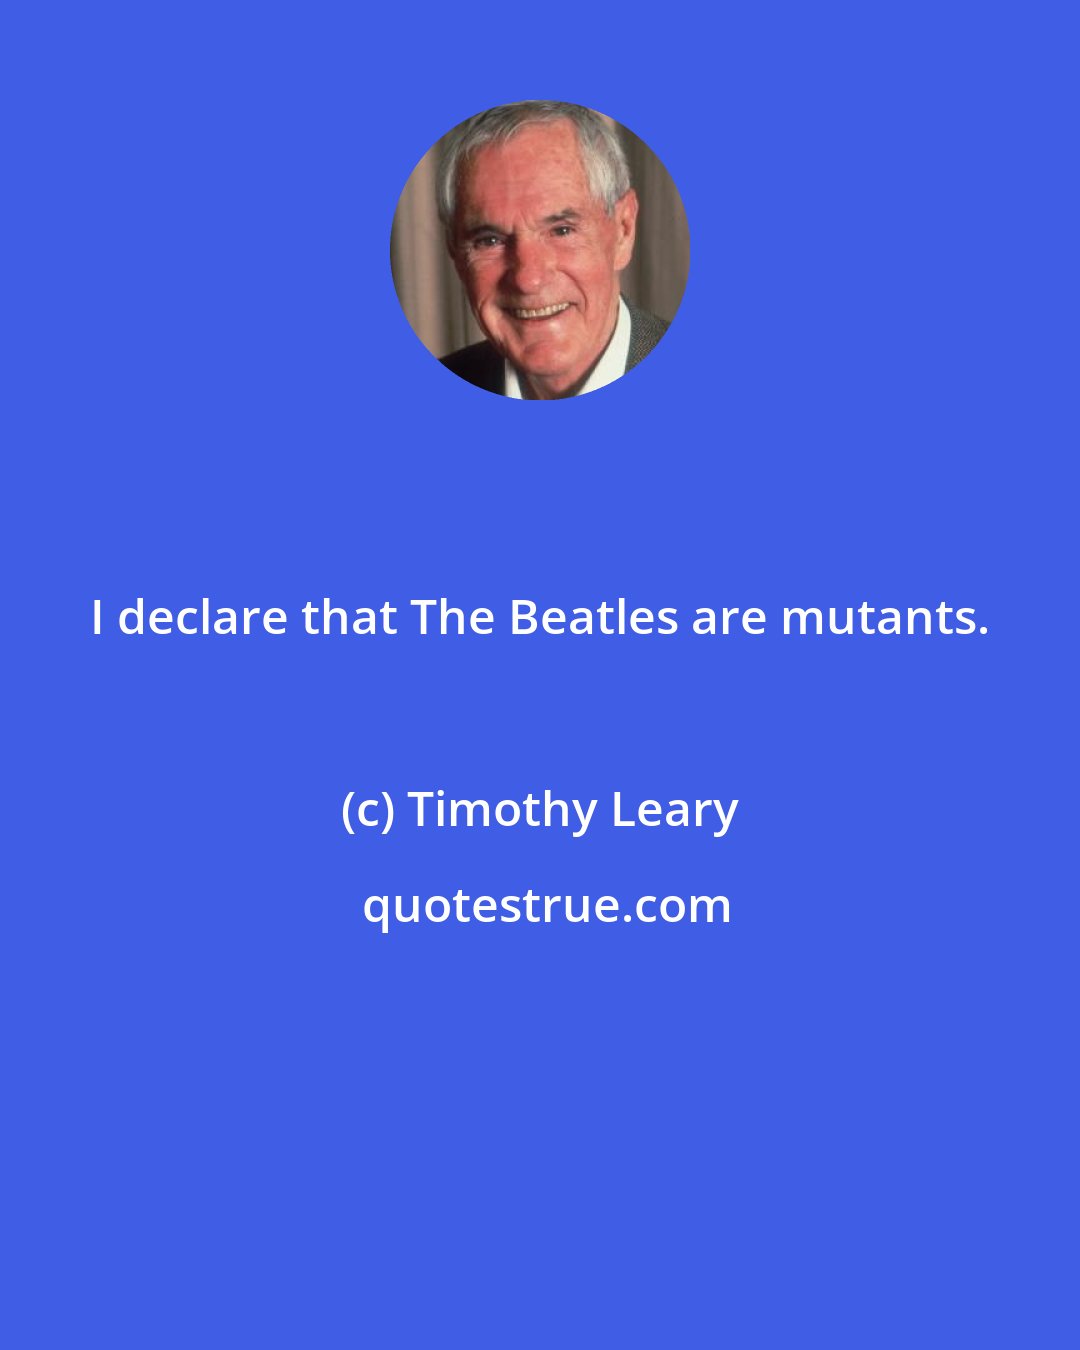 Timothy Leary: I declare that The Beatles are mutants.